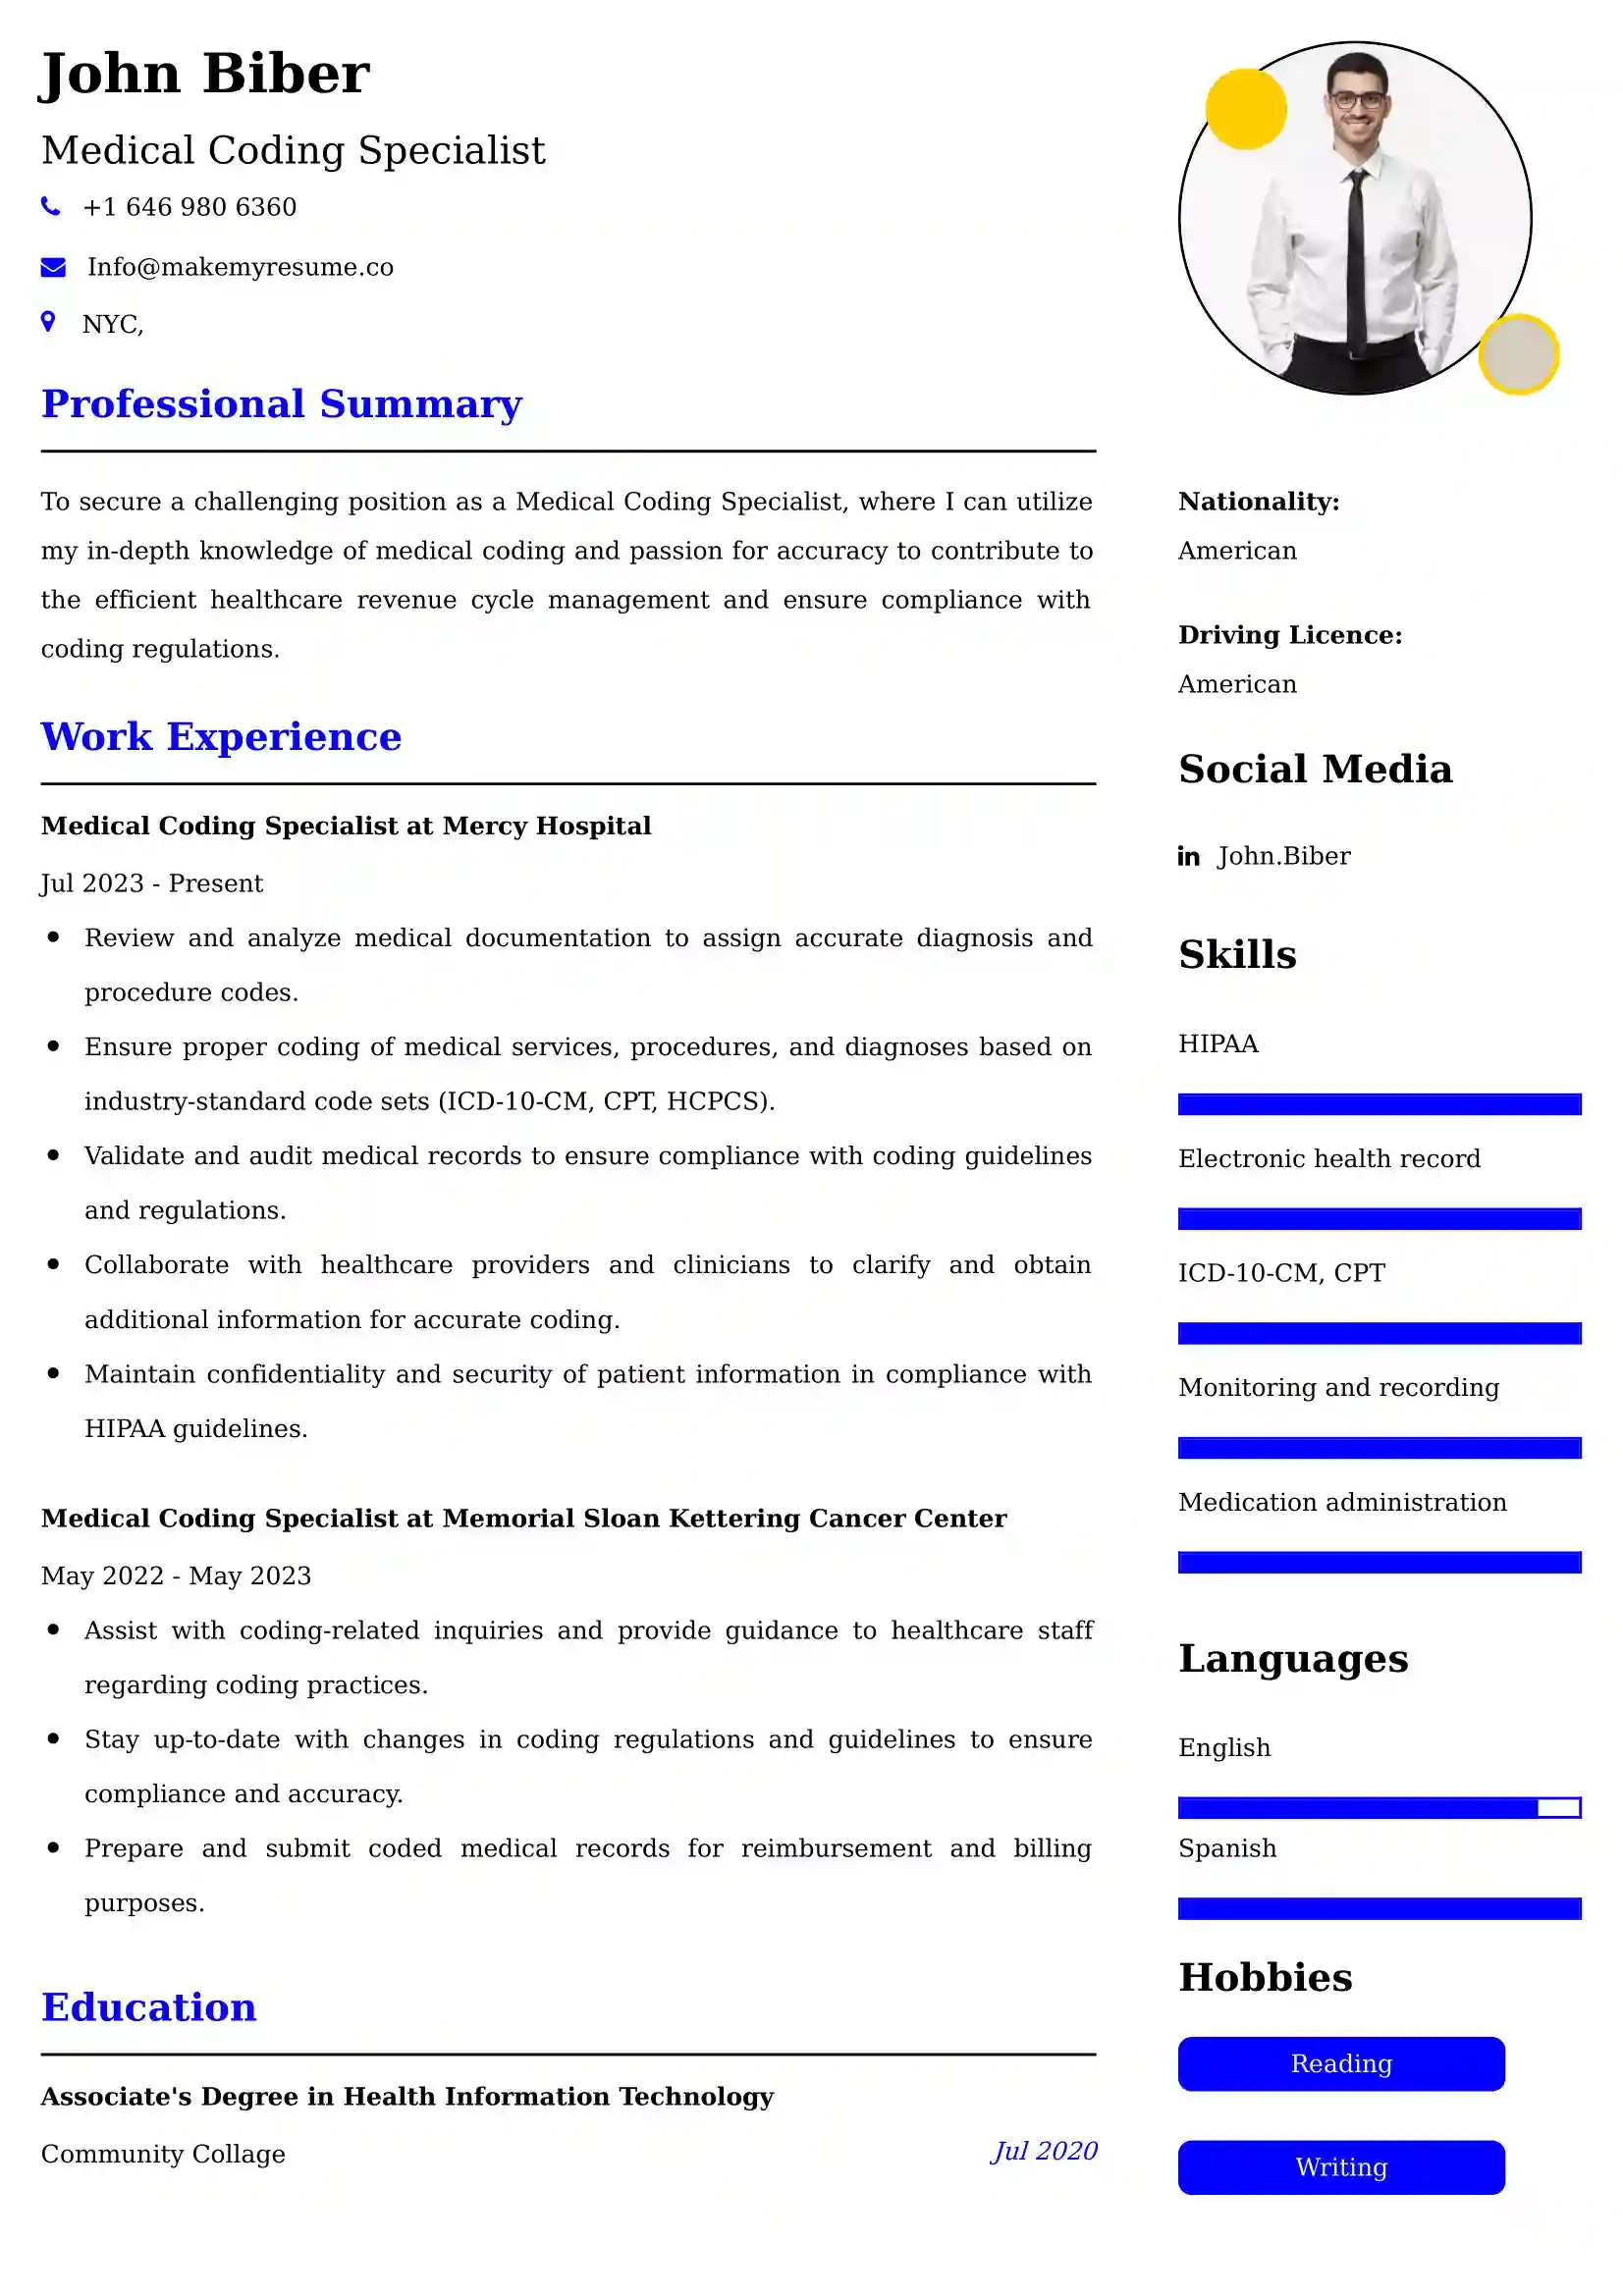 Best Medical Coding Specialist Resume Examples for UAE